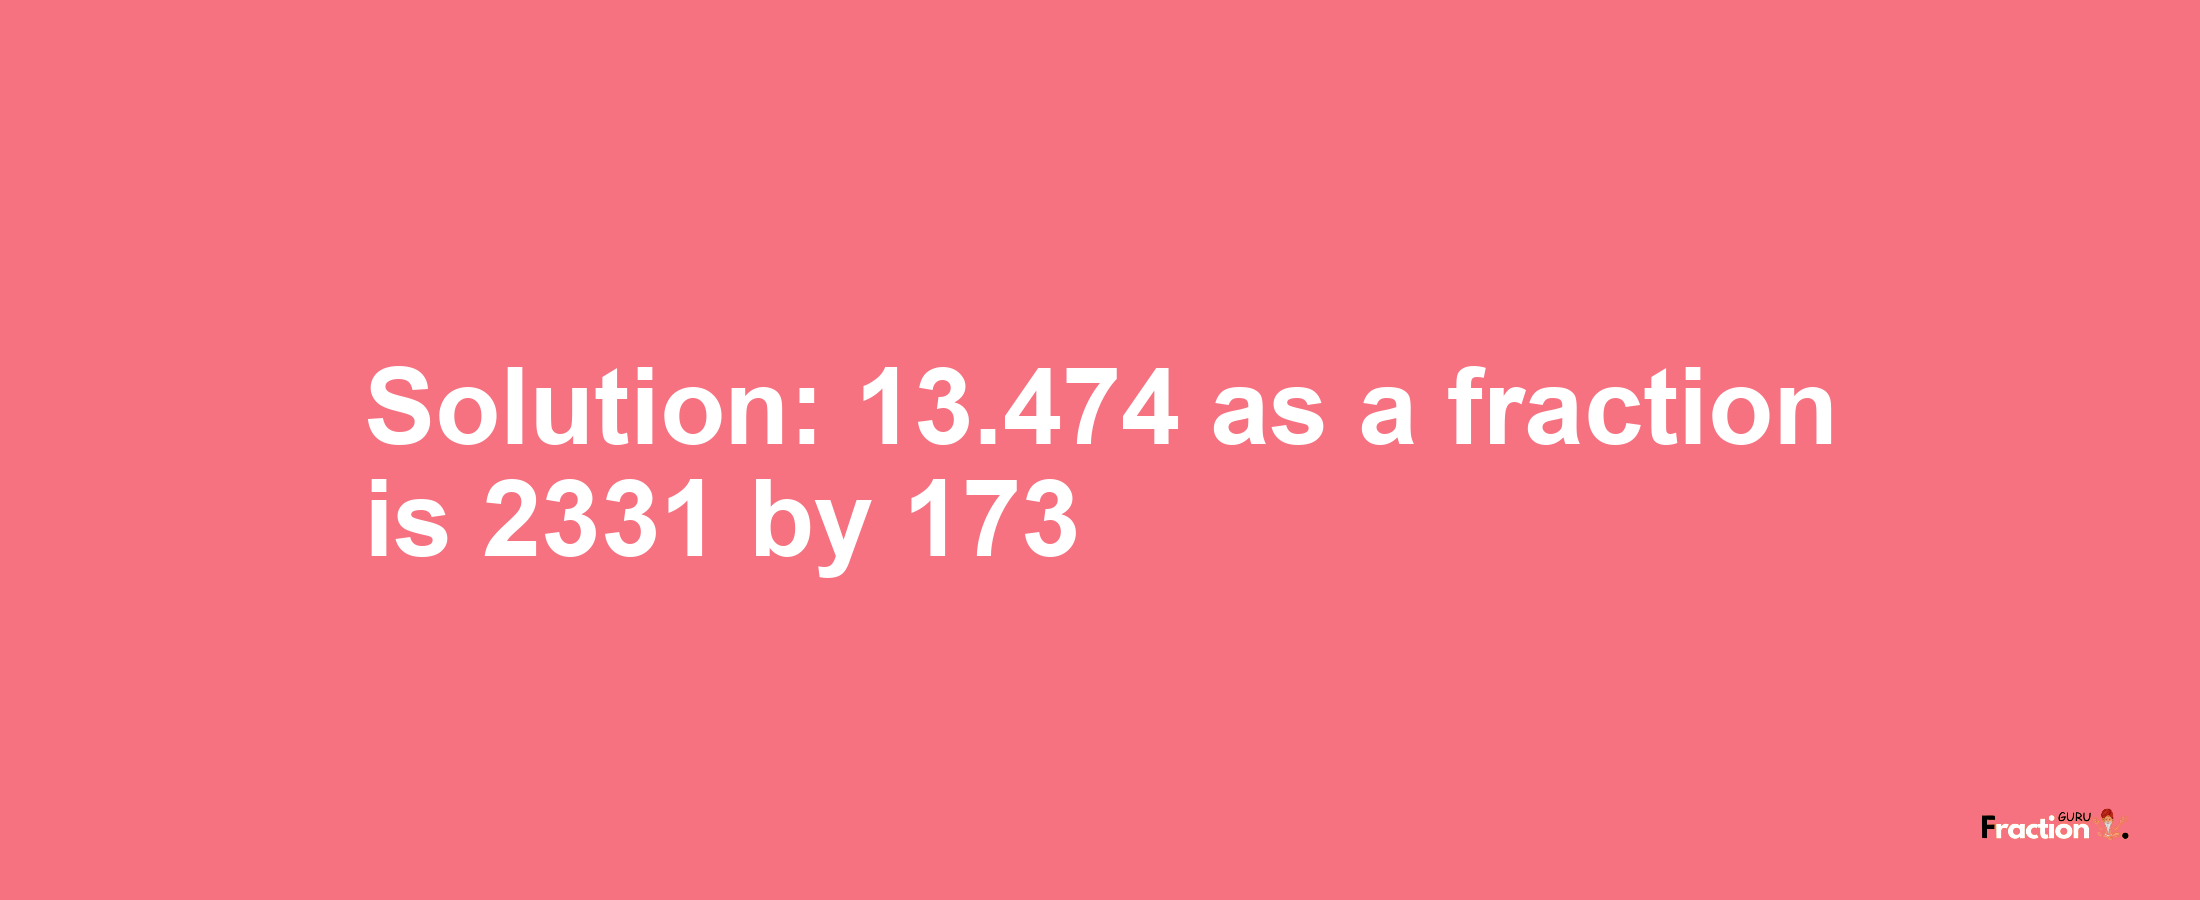 Solution:13.474 as a fraction is 2331/173